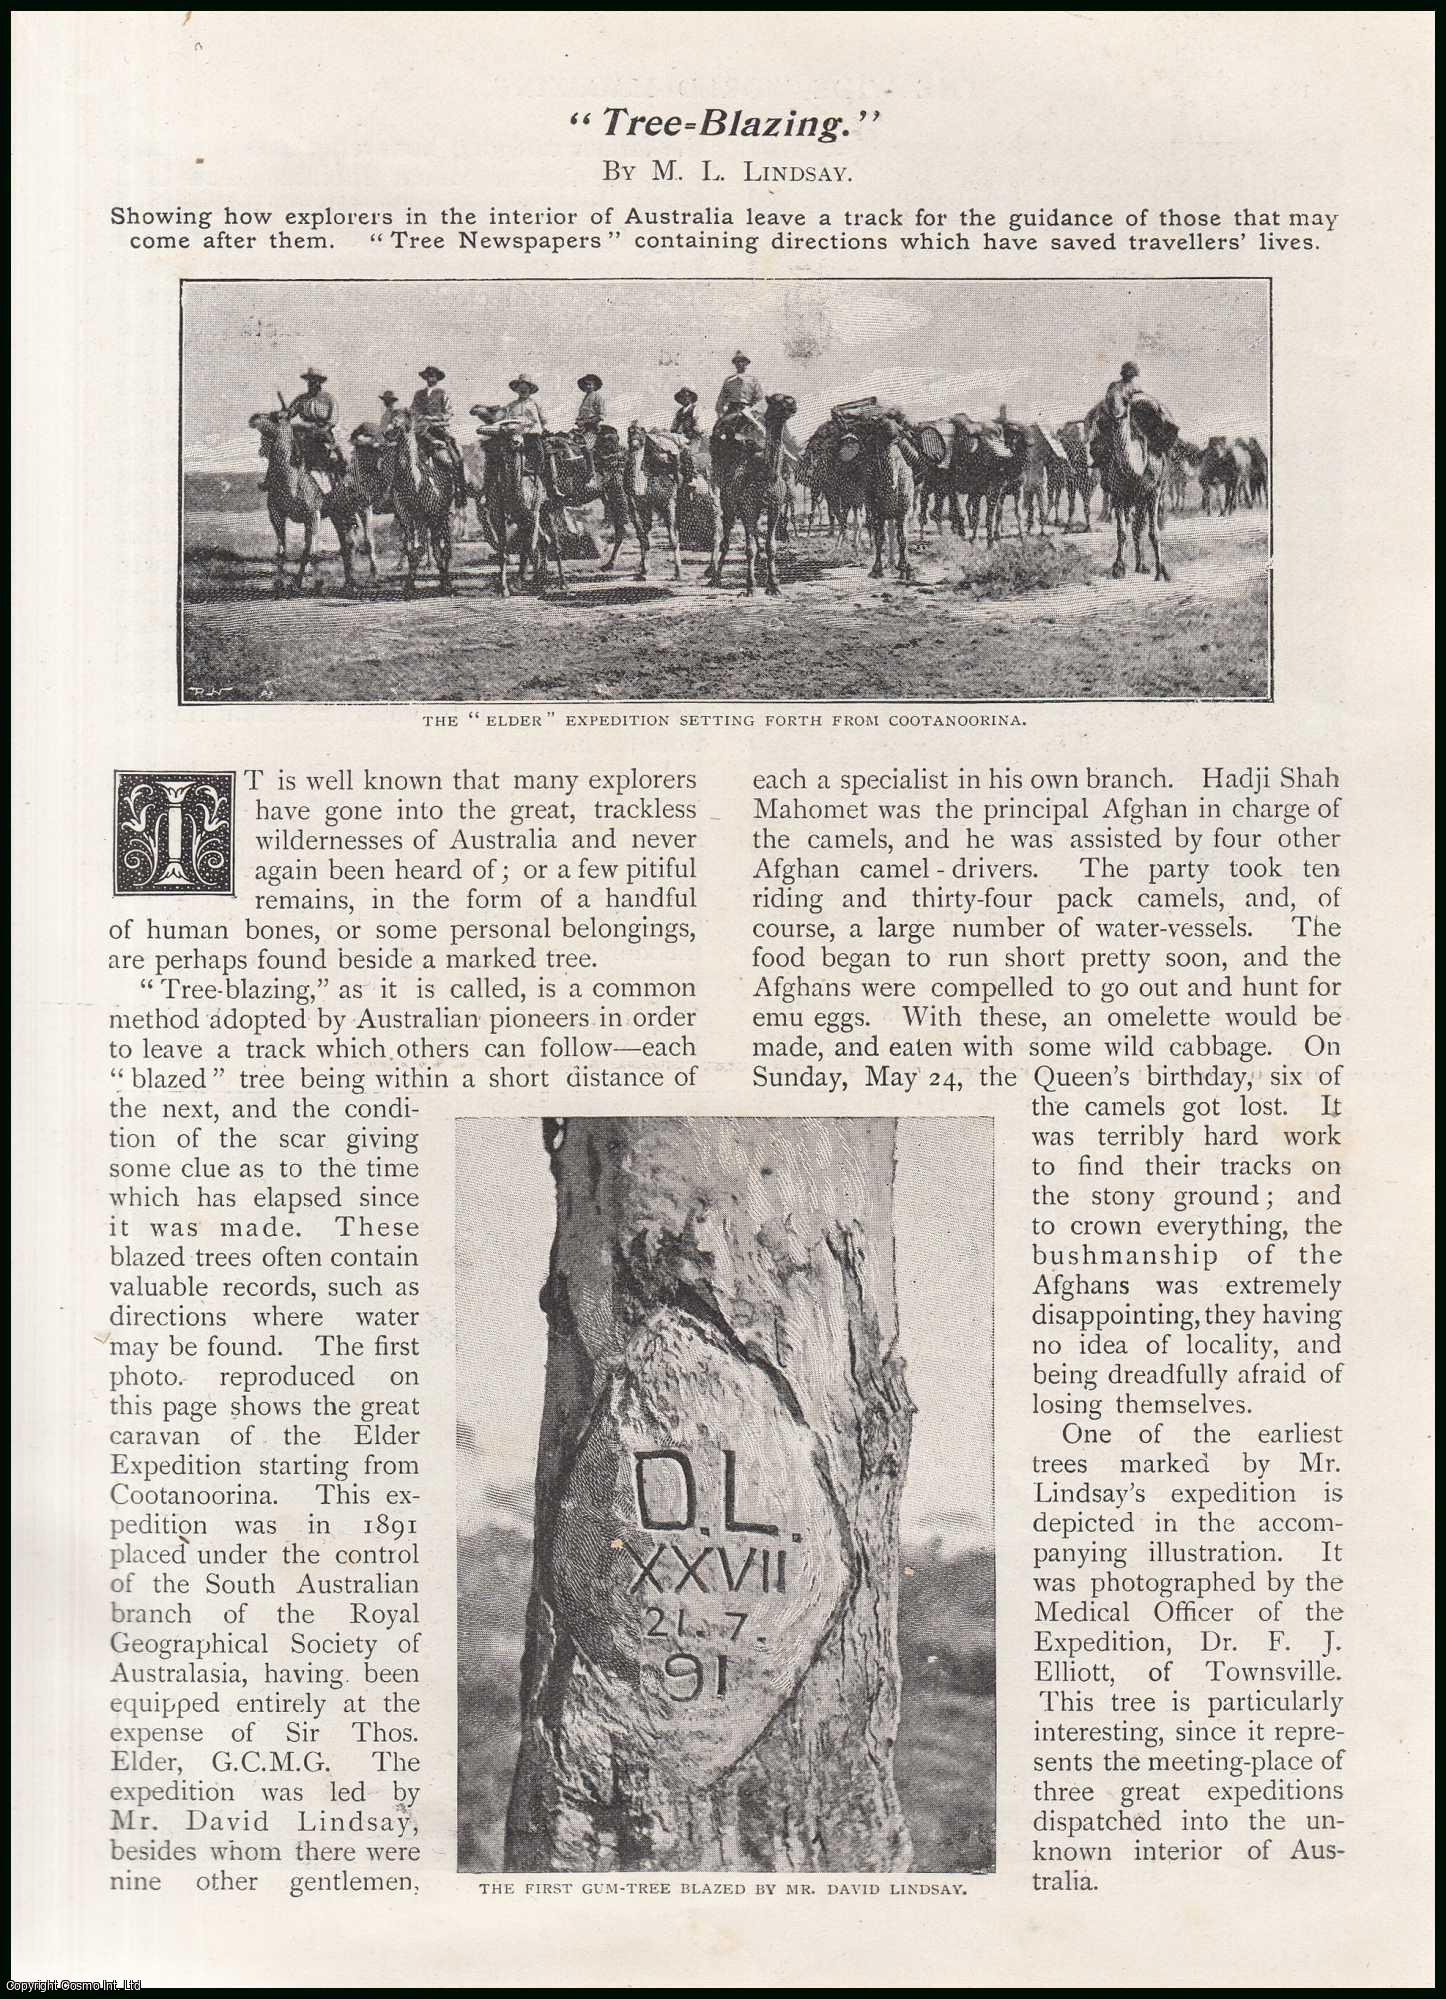 M. L. Lindsay - Tree Blazing in Australia : An account of signs and signals left on tree trunks by various expeditions in the uncharted regions of Australia. An uncommon original article from the Wide World Magazine, 1898.